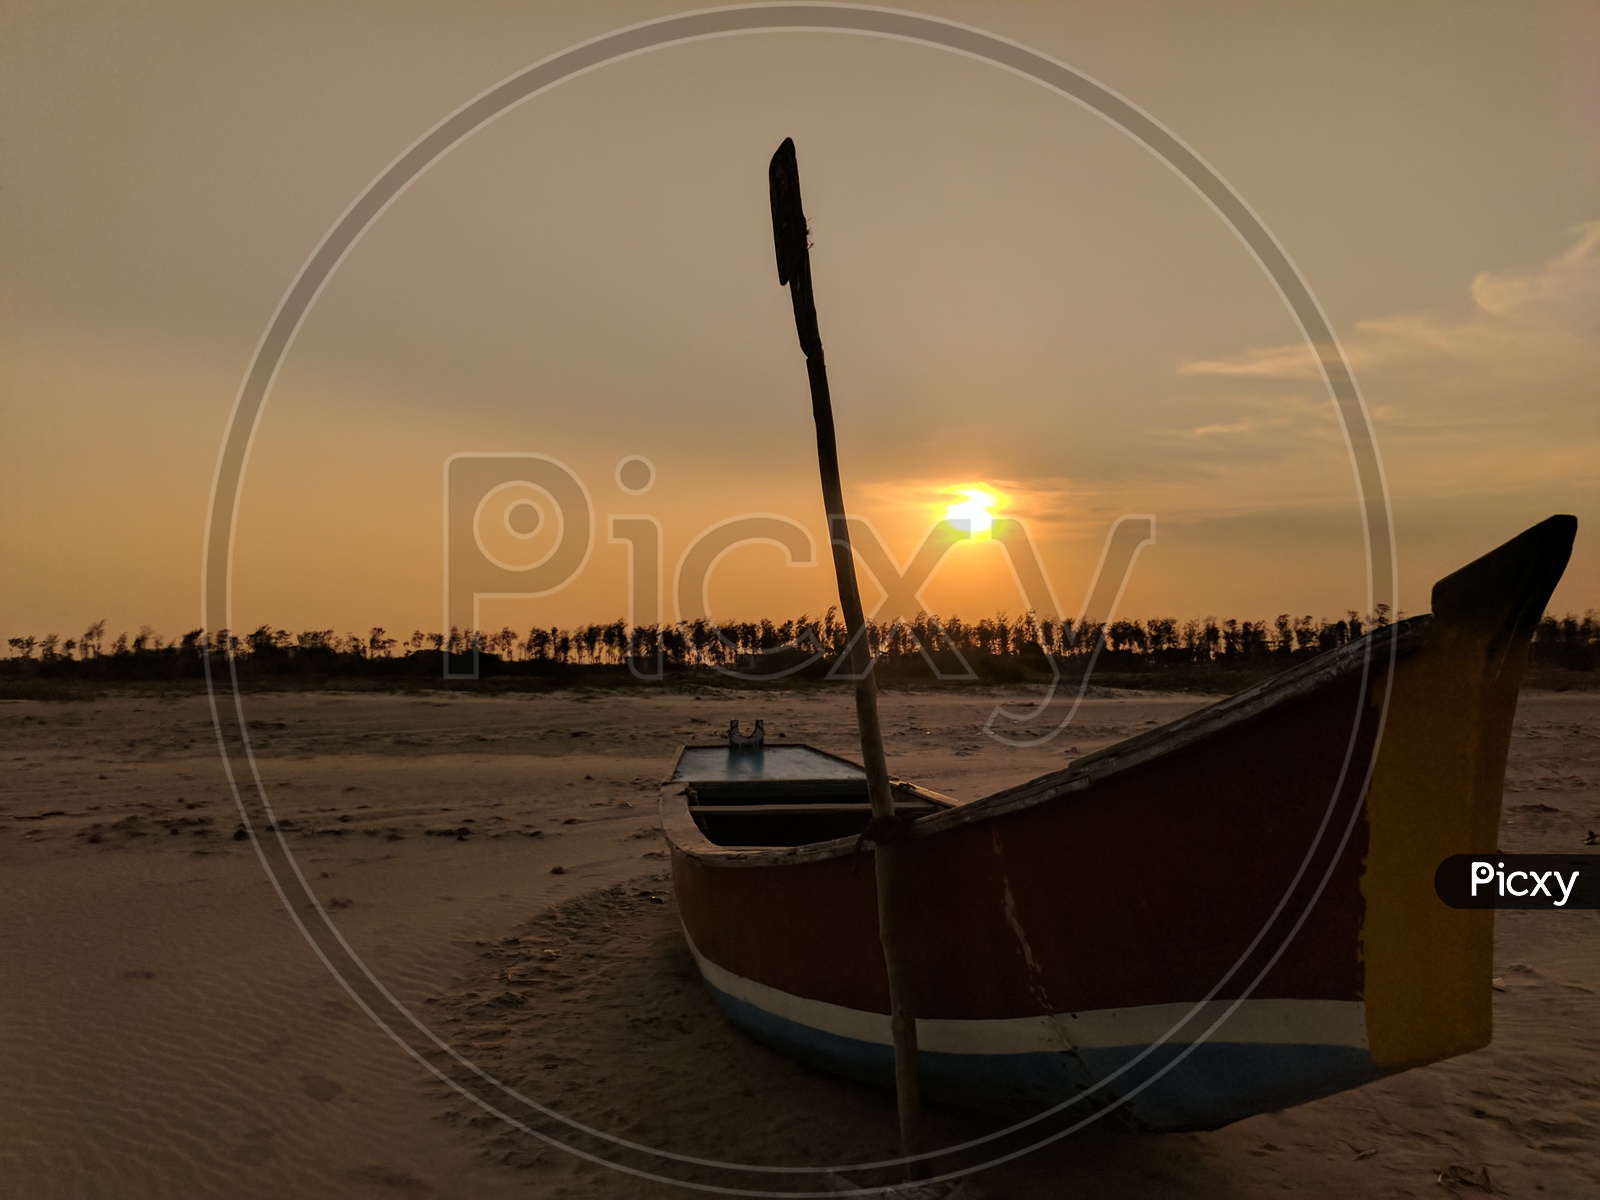 A Lone Boat In a Beach With Sand and Sunset In Background